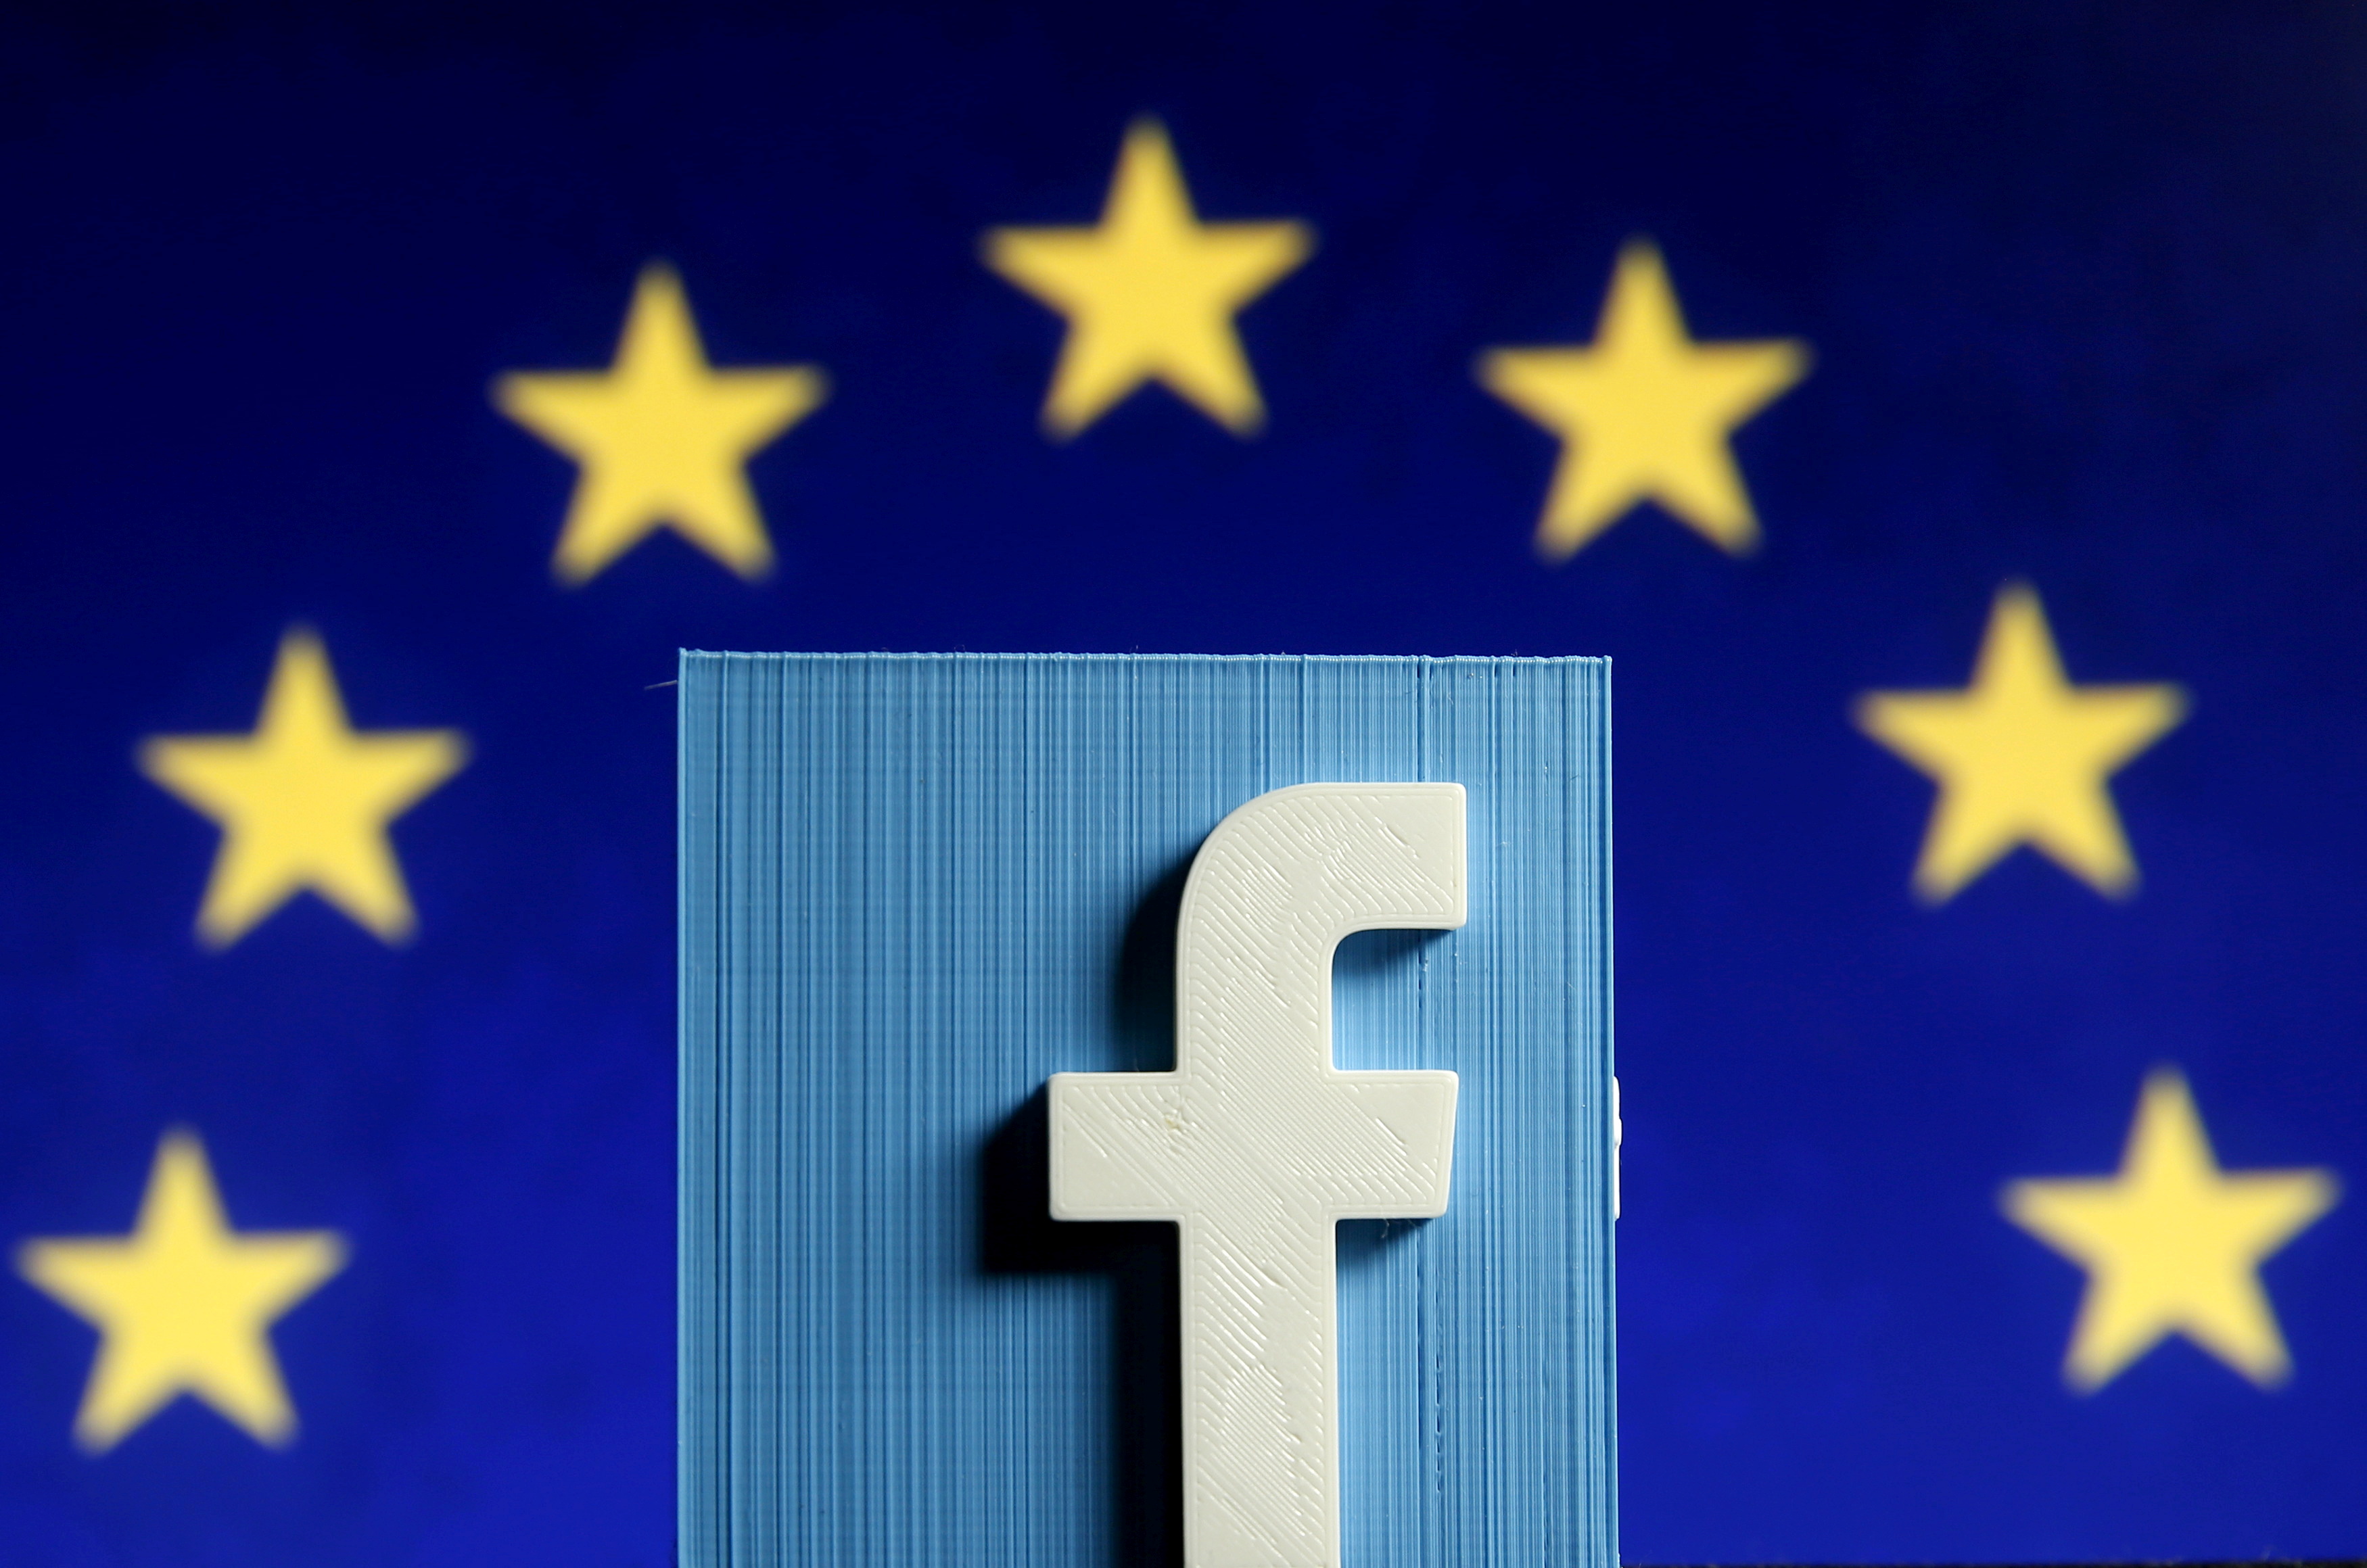 3D-printed Facebook logo is seen in front of the logo of the European Union in this picture illustration made in Zenica, Bosnia and Herzegovina on May 15, 2015.  REUTERS/Dado Ruvic/File Photo